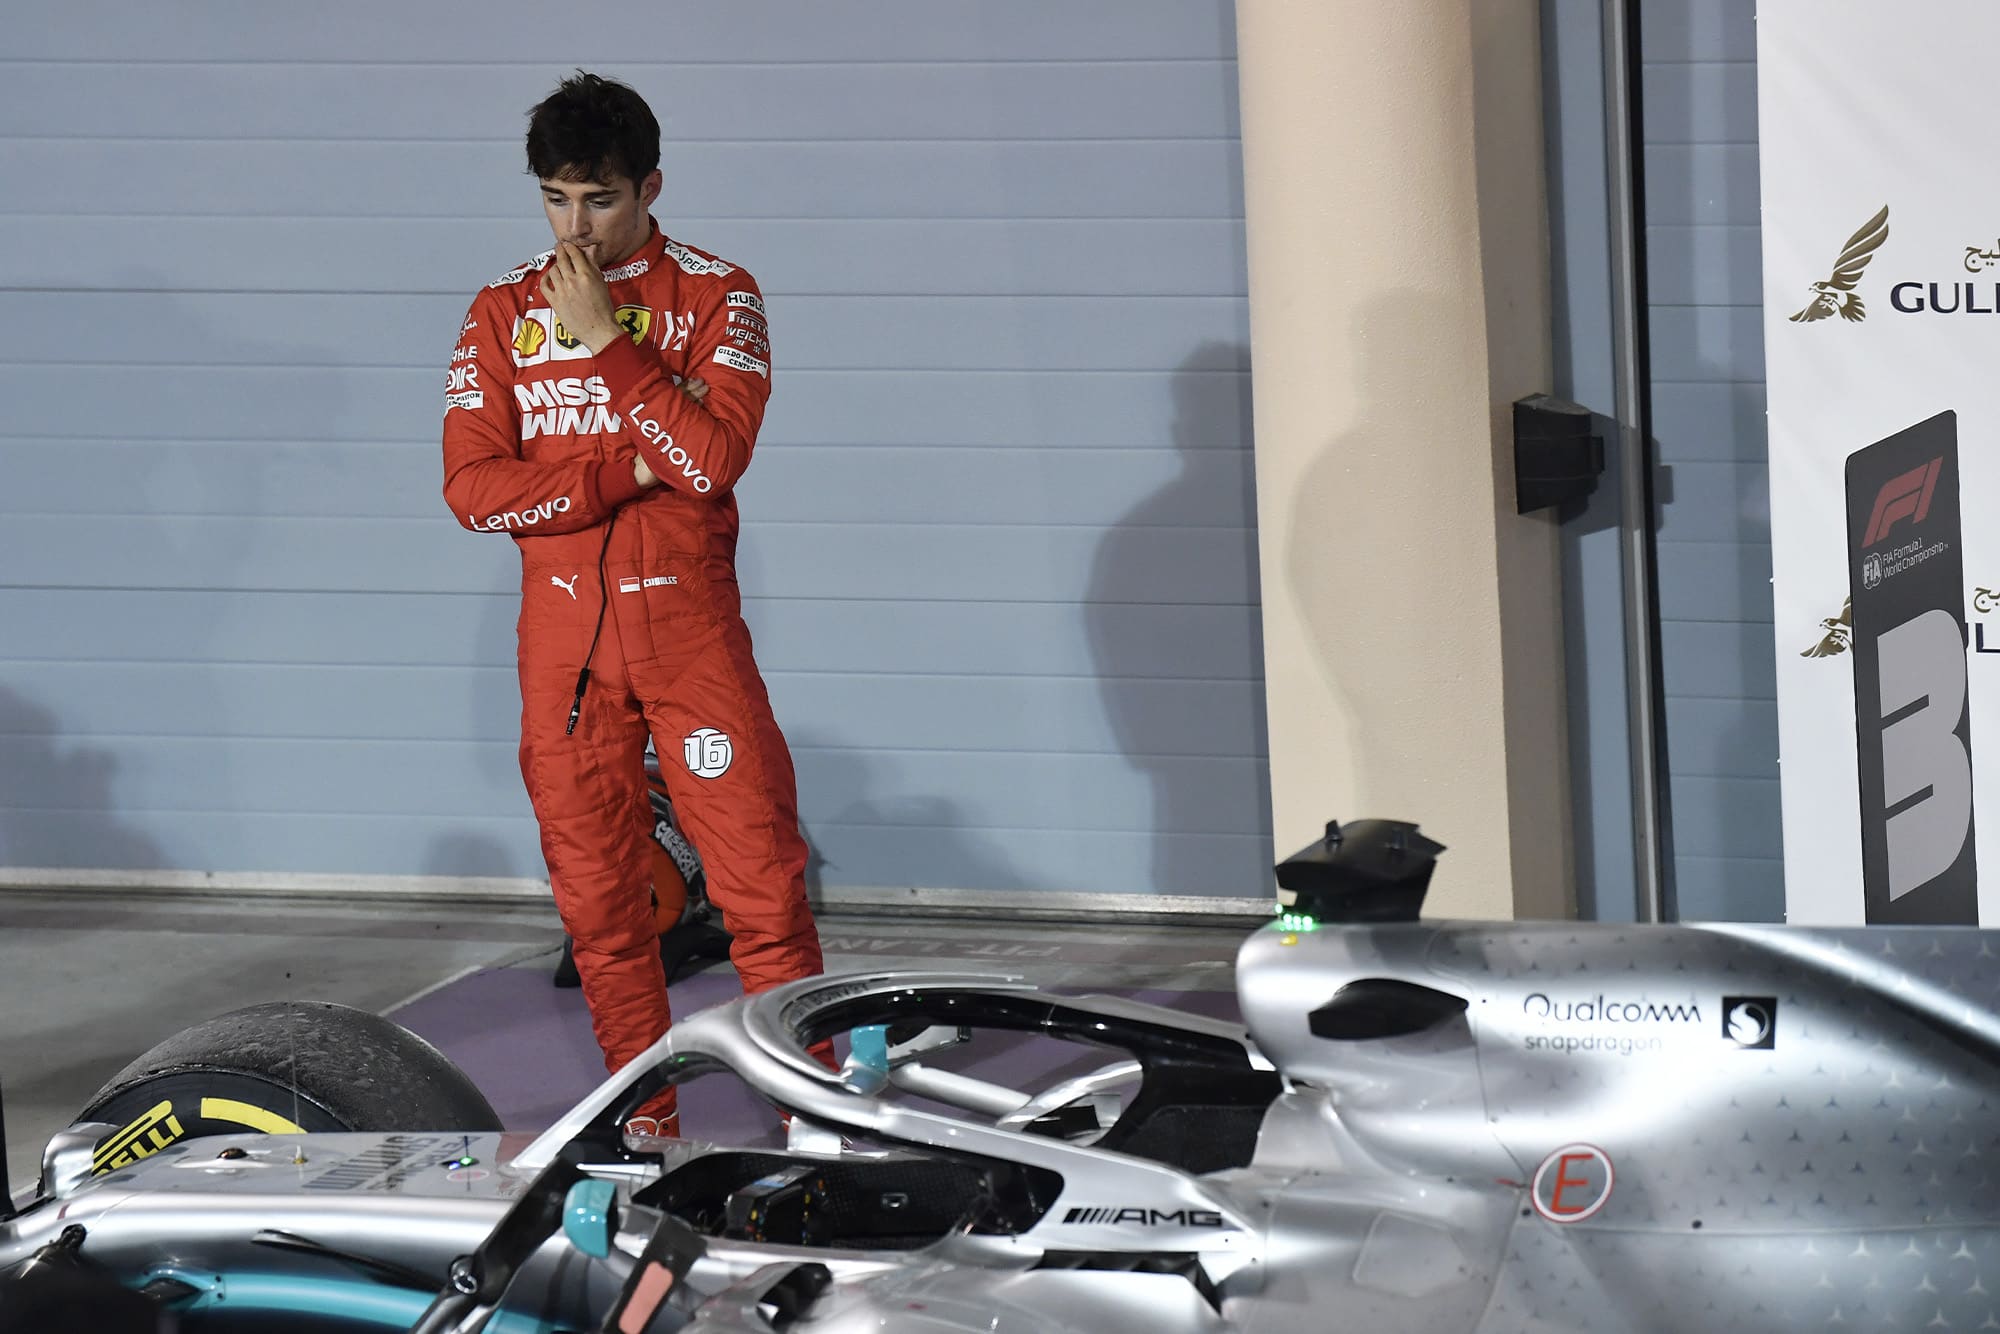 Charles Leclerc reflects on an opportunity missed after the Bahrain Grand Prix